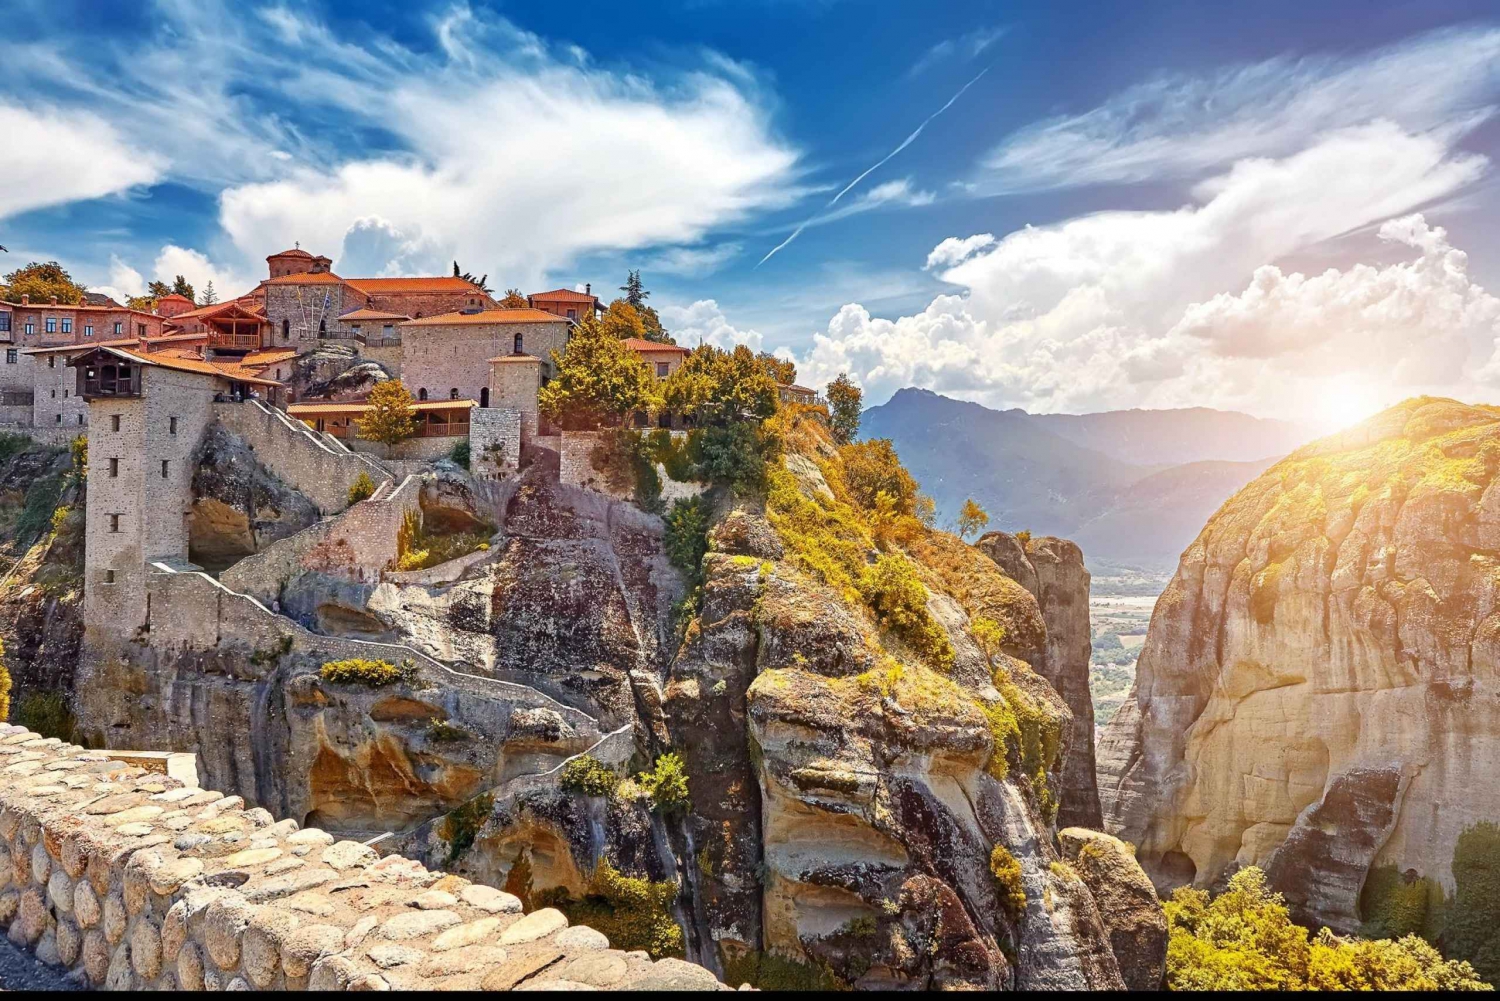 From Athens: Private Full-Day Meteora and Kastraki Tour